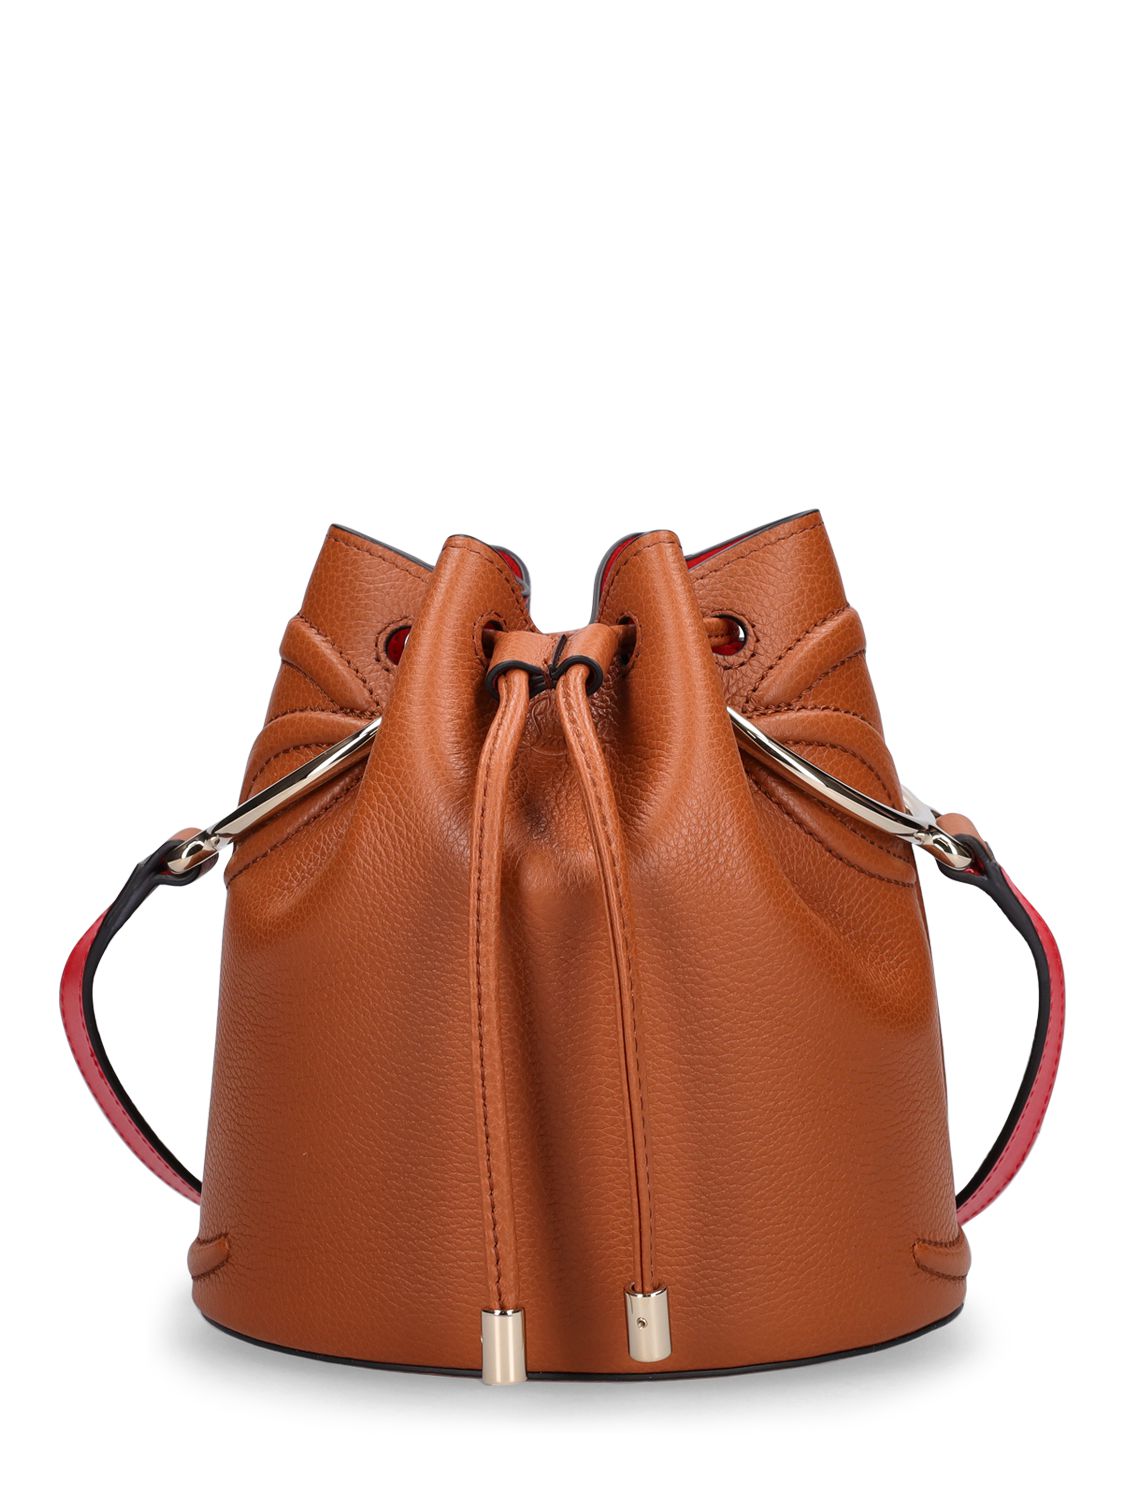 By My Side Leather Bucket Bag